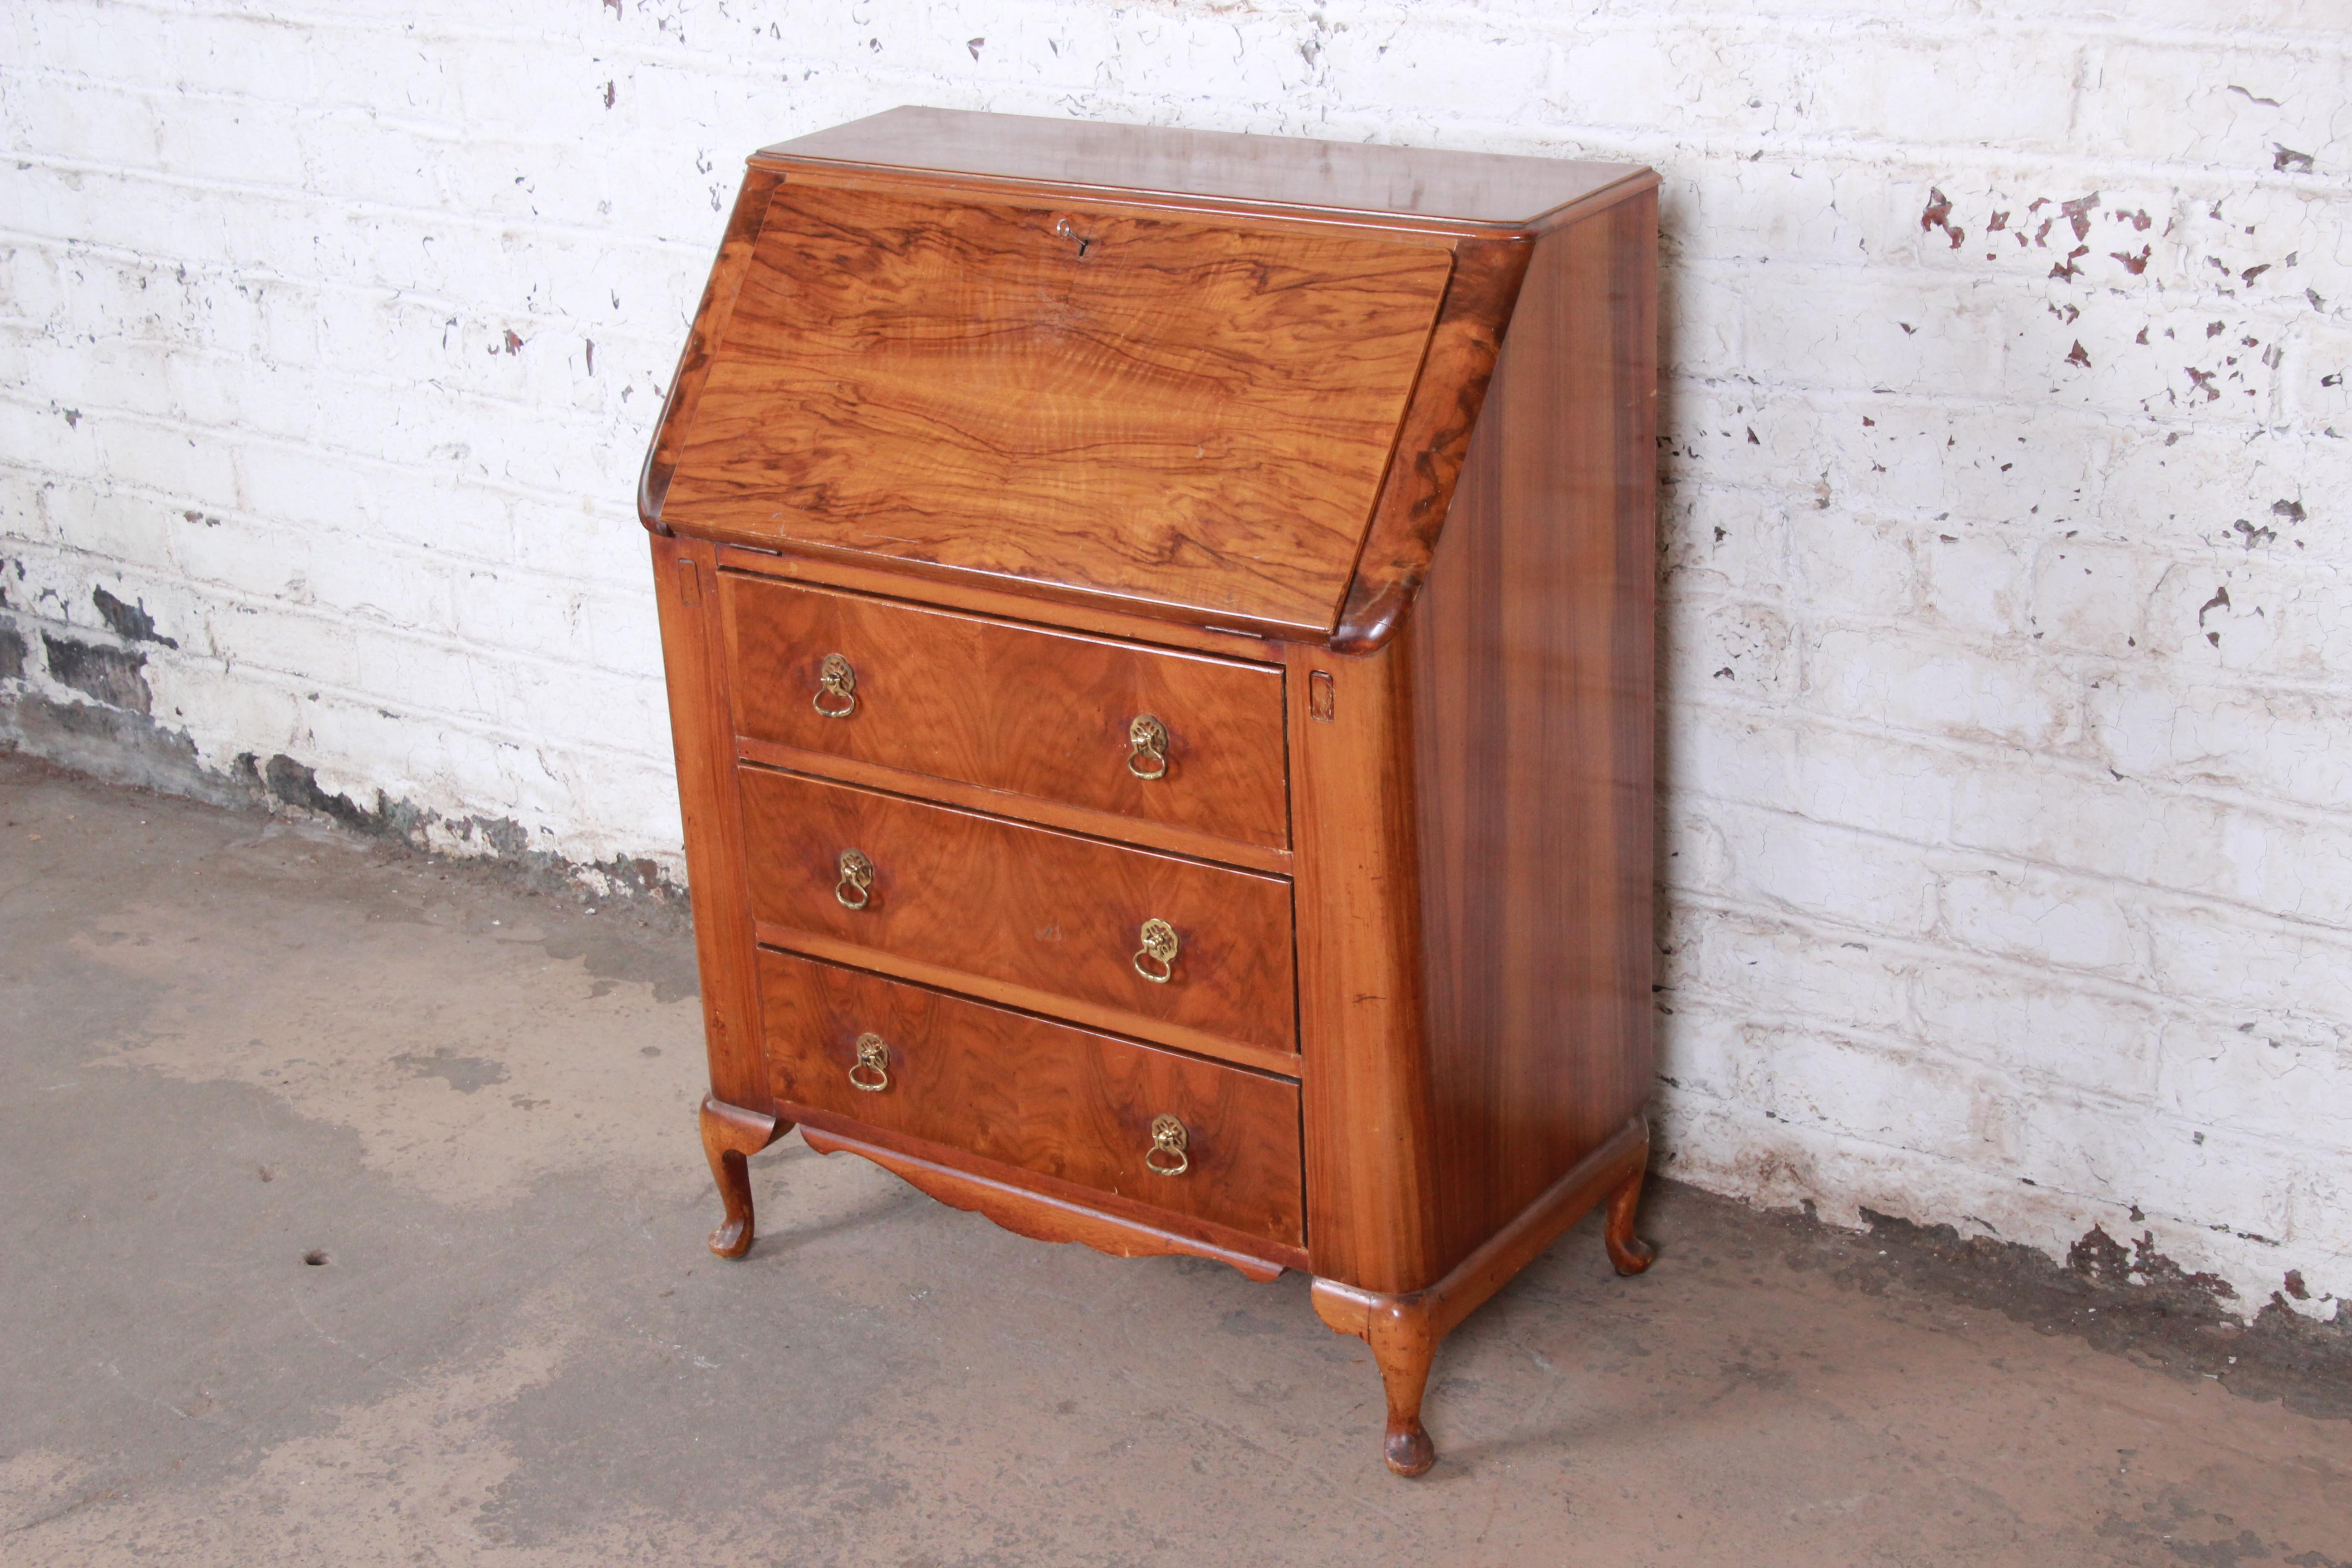 A gorgeous antique burled walnut drop-front secretary desk by Lebus Furniture, circa 1940s. The desk features stunning wood grain and Queen Anne style legs. It offers good storage, with a single drawer and several cubbies behind the drop front and